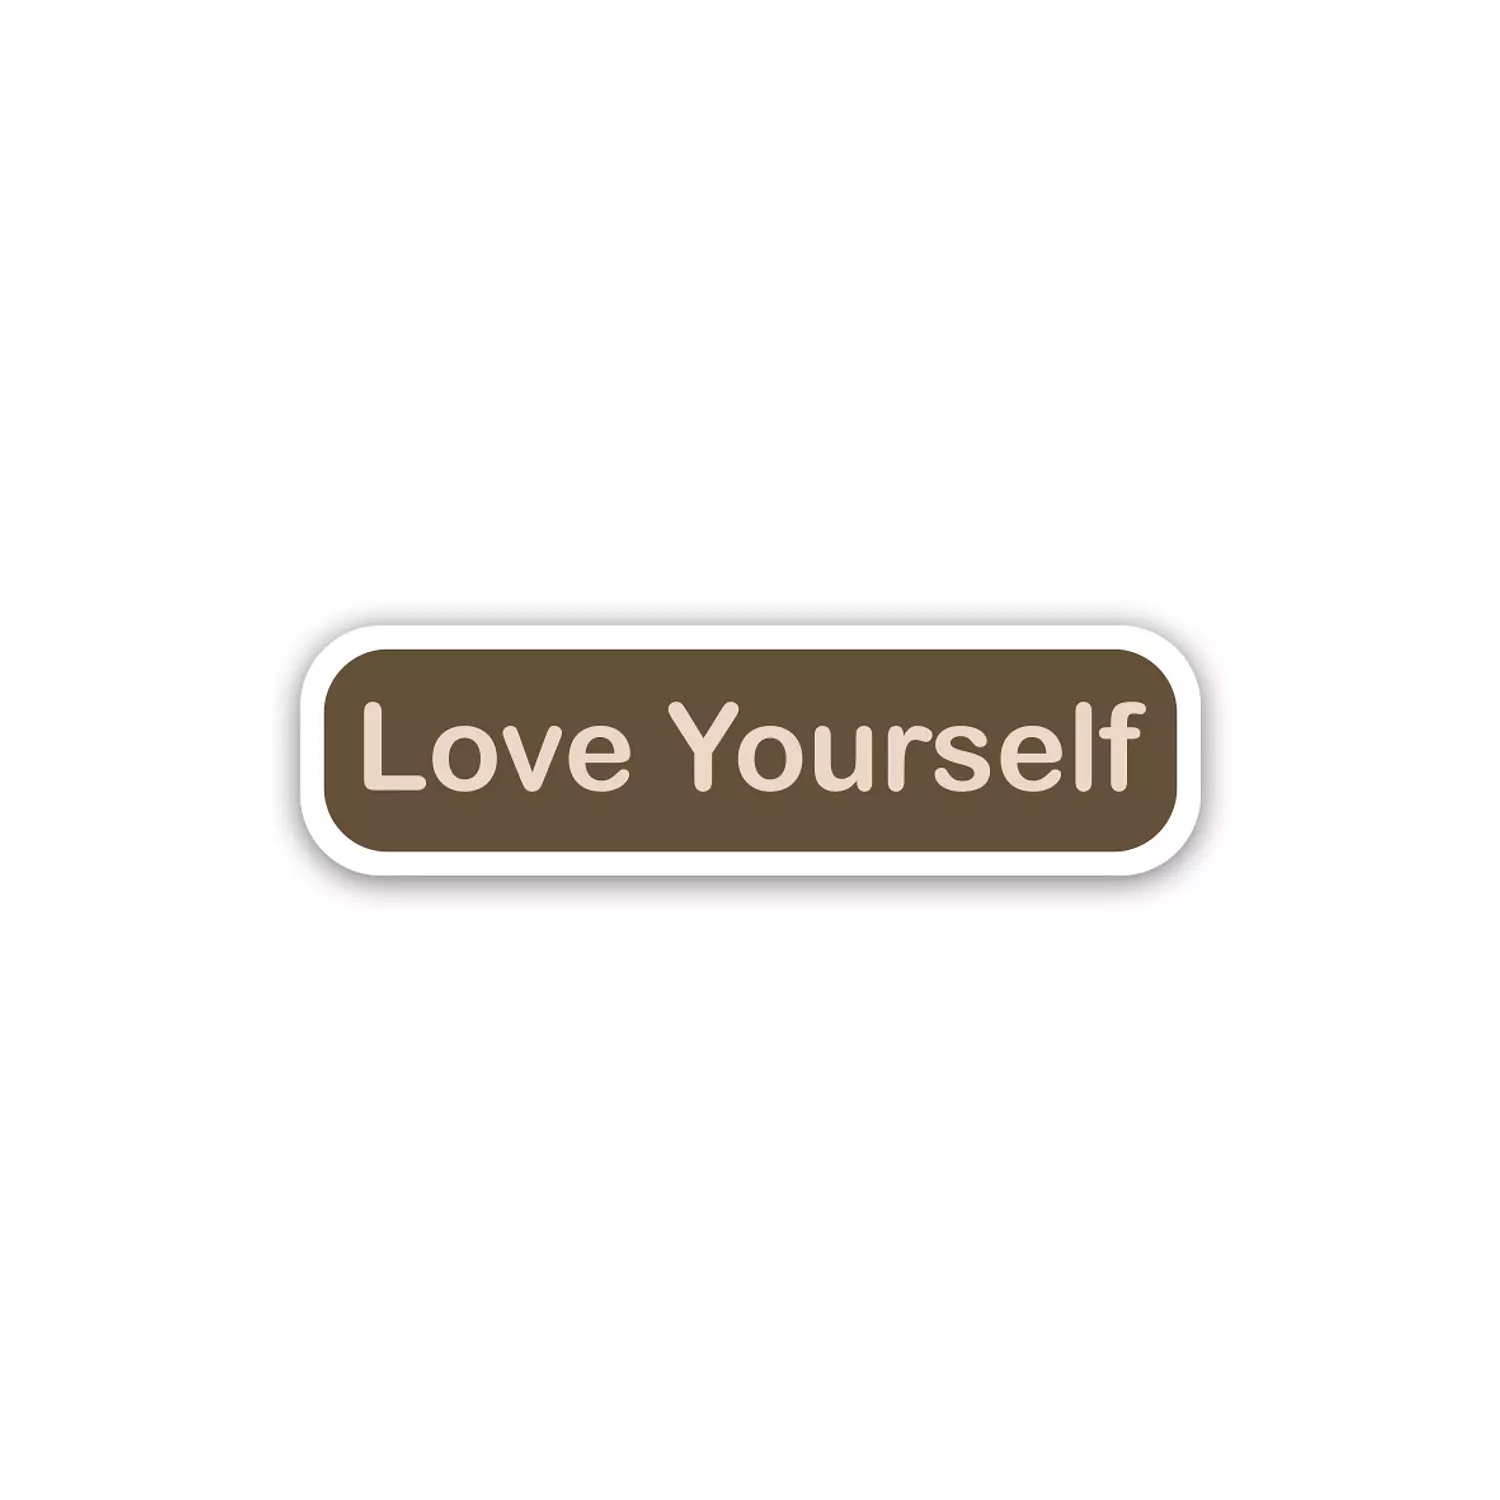 Love Yourself - Positive Quotes  hover image